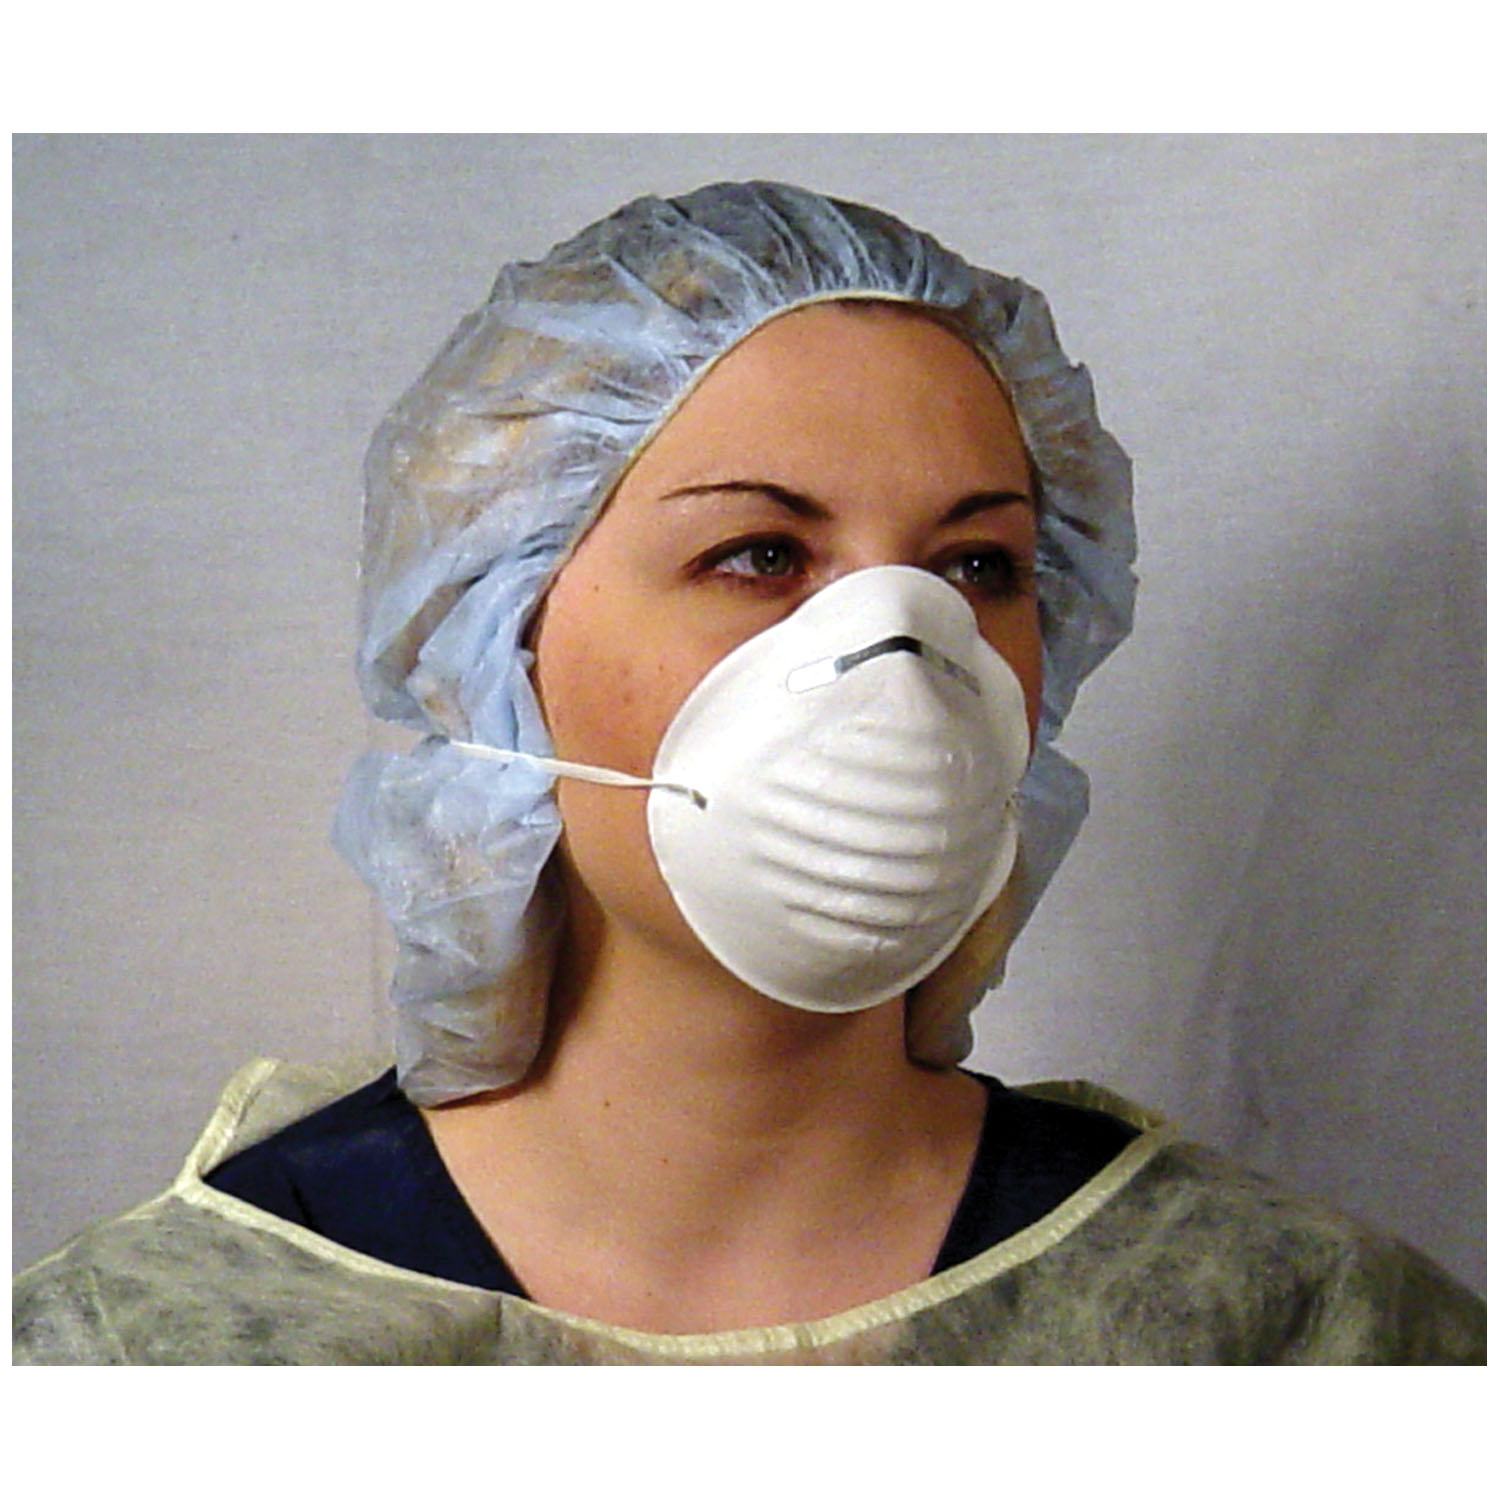 DUKAL SURGICAL FACE MASKS : 1520 BX $5.32 Stocked